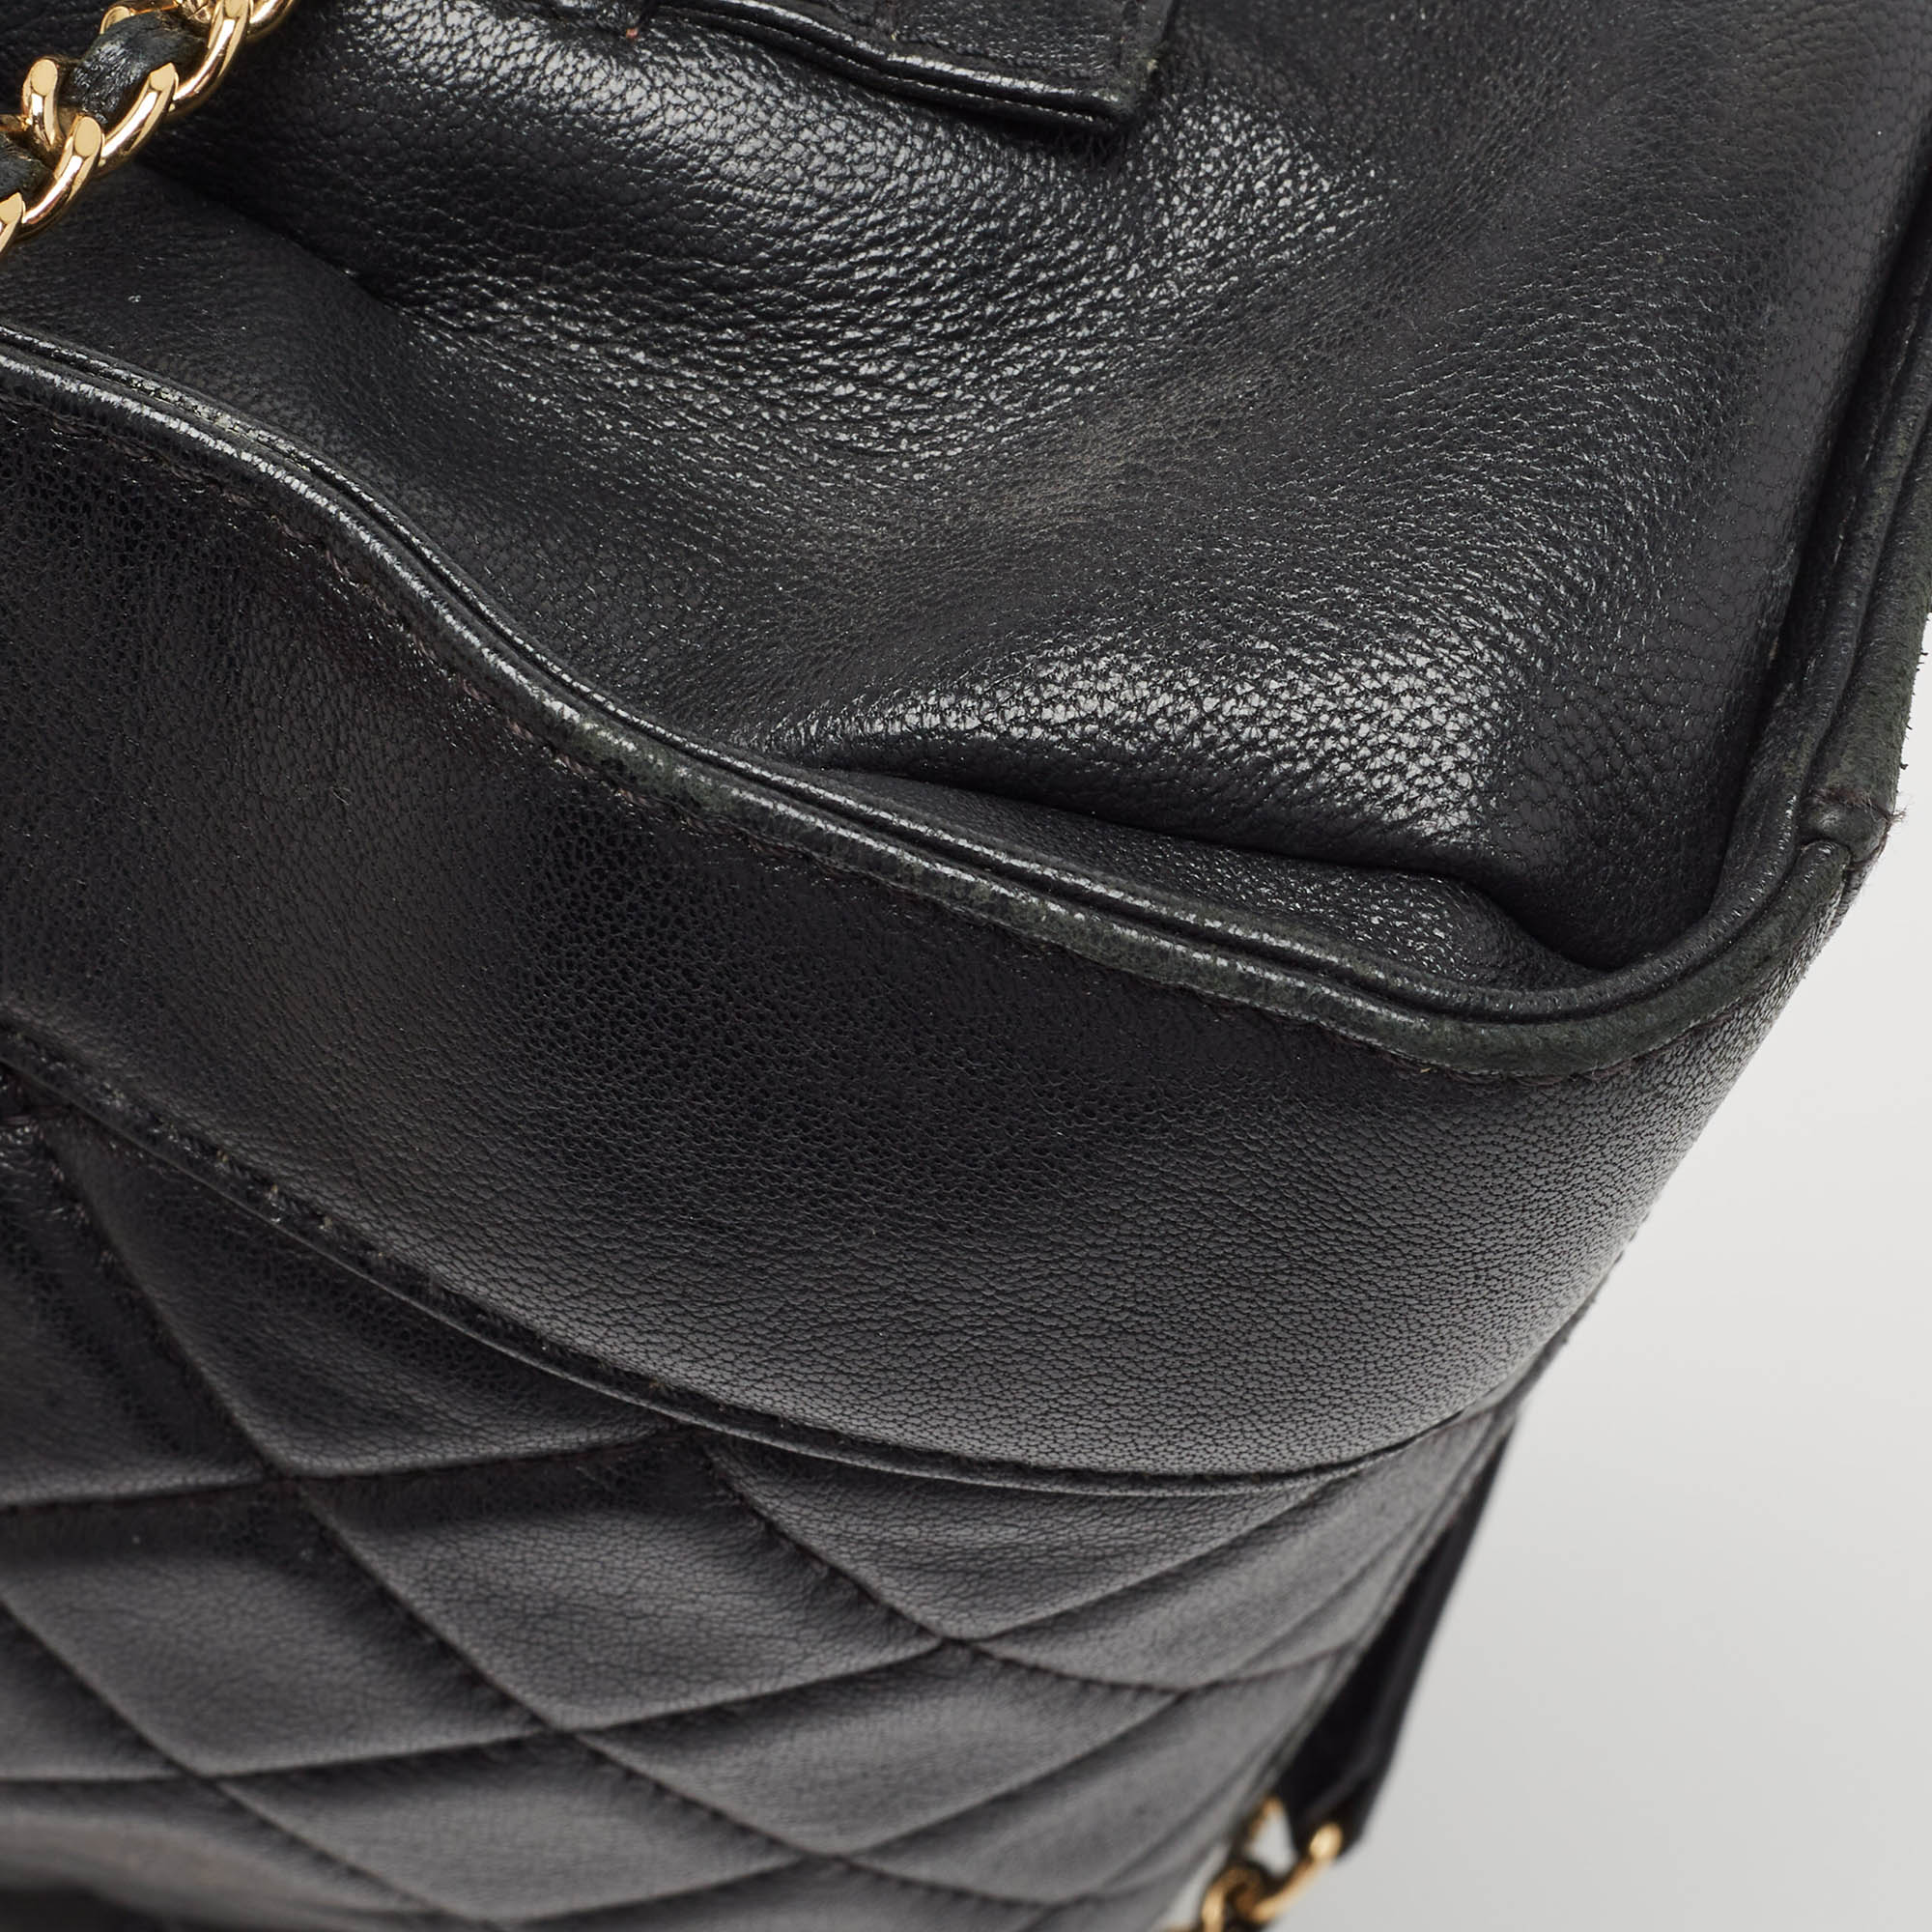 Chanel Black Quilted Leather CC Chain Tote